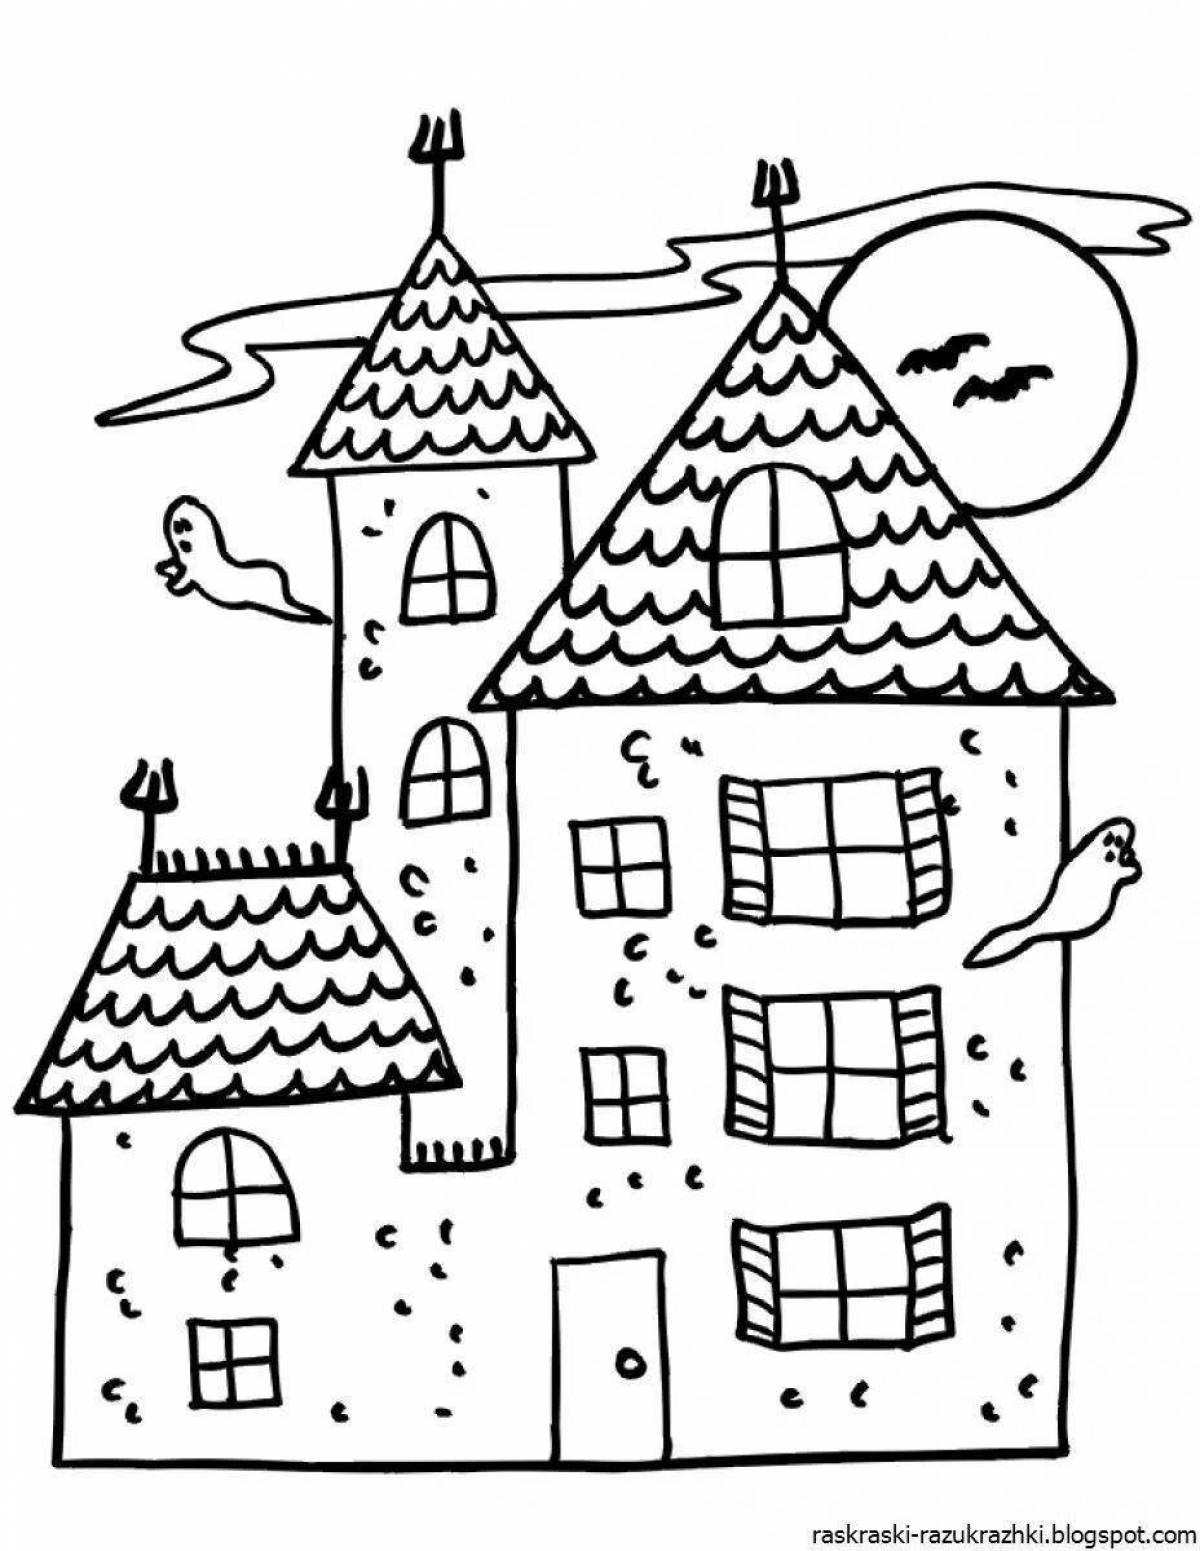 Creative house coloring book for 6-7 year olds